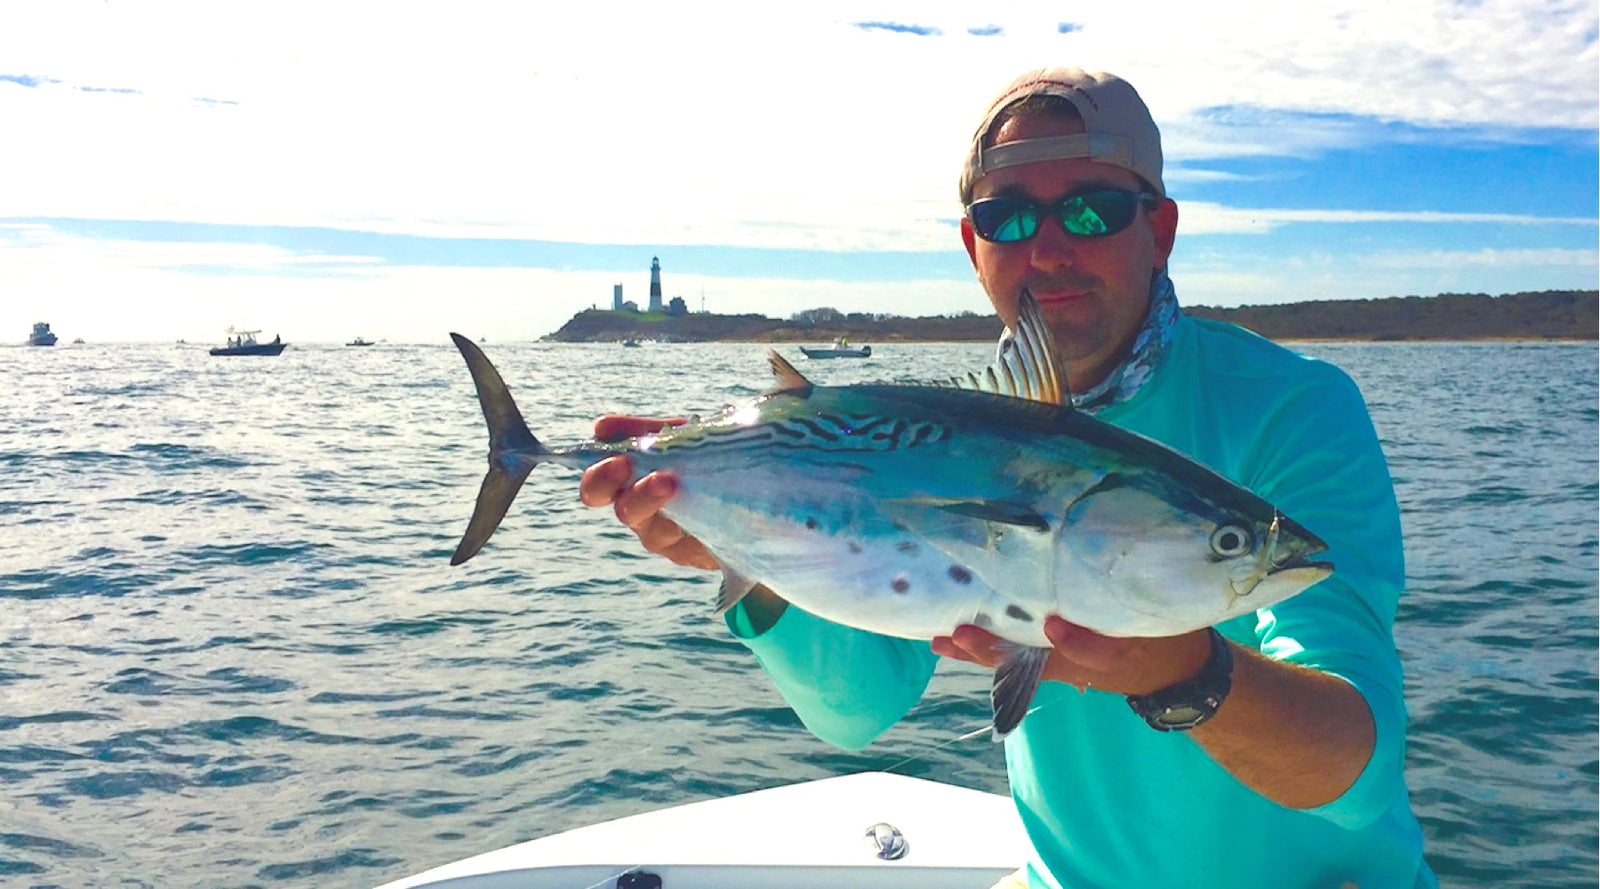 How to Catch Albacore - Tips for Fishing for Albacore